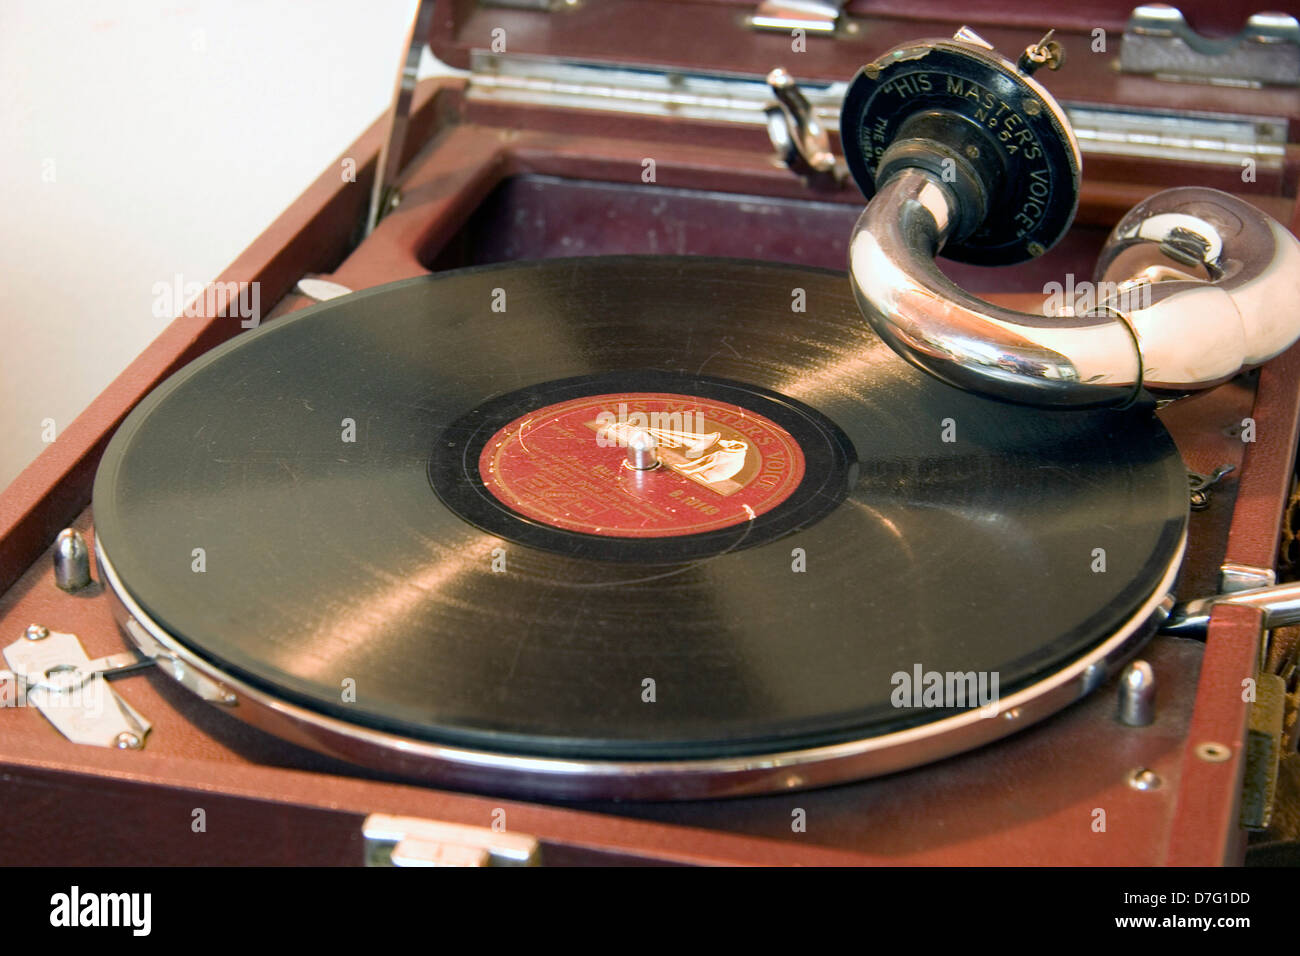 His Masters Voice gramophone model 5A Stock Photo